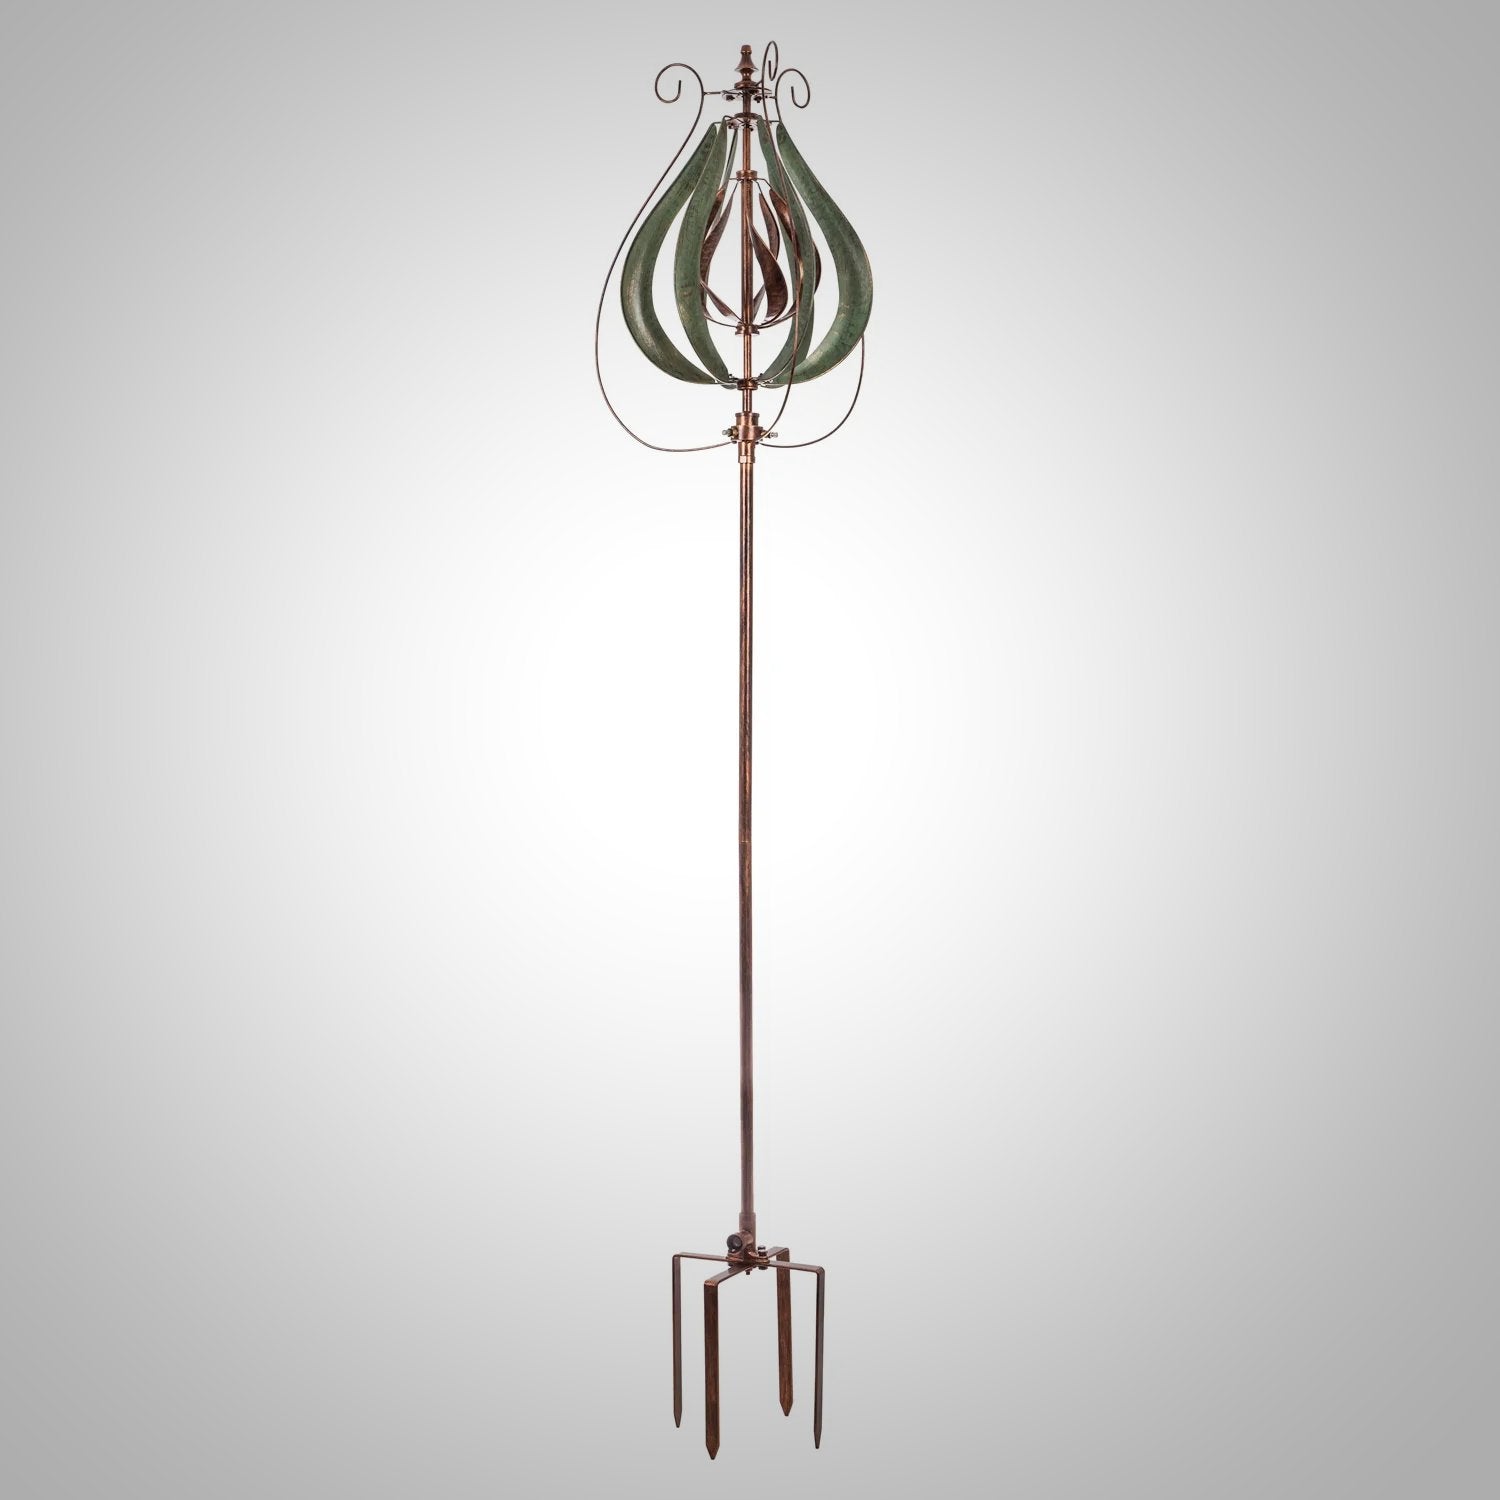 87.5"H Misting Wind Spinner, Copper and Verdigris